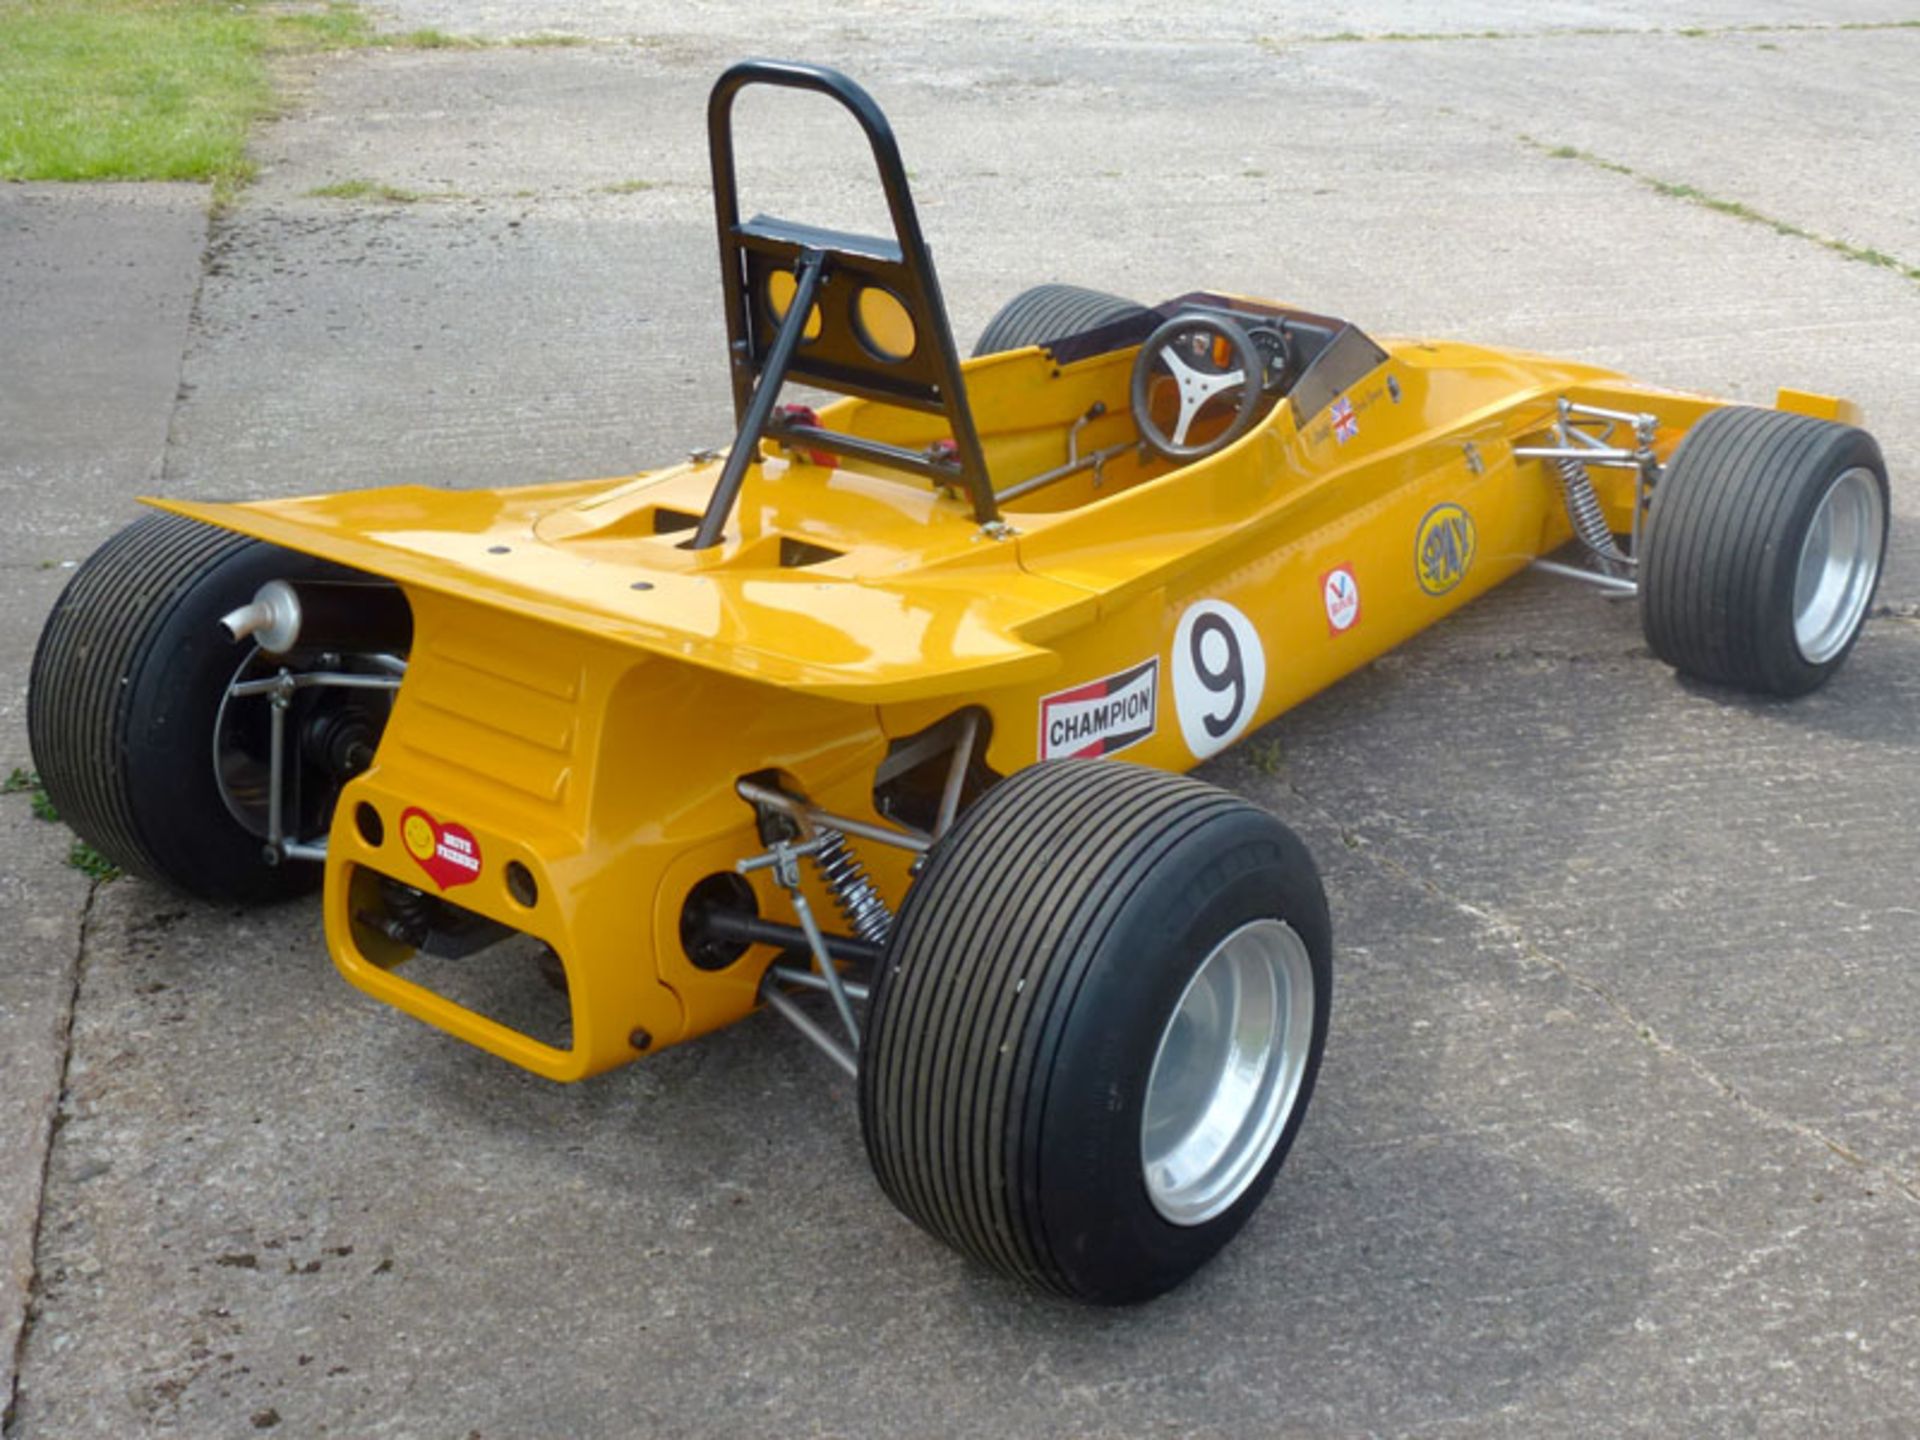 - Two-thirds scale single-seater with steel monocoque tub and GRP bodywork - Yamaha 125cc engine - Image 2 of 7